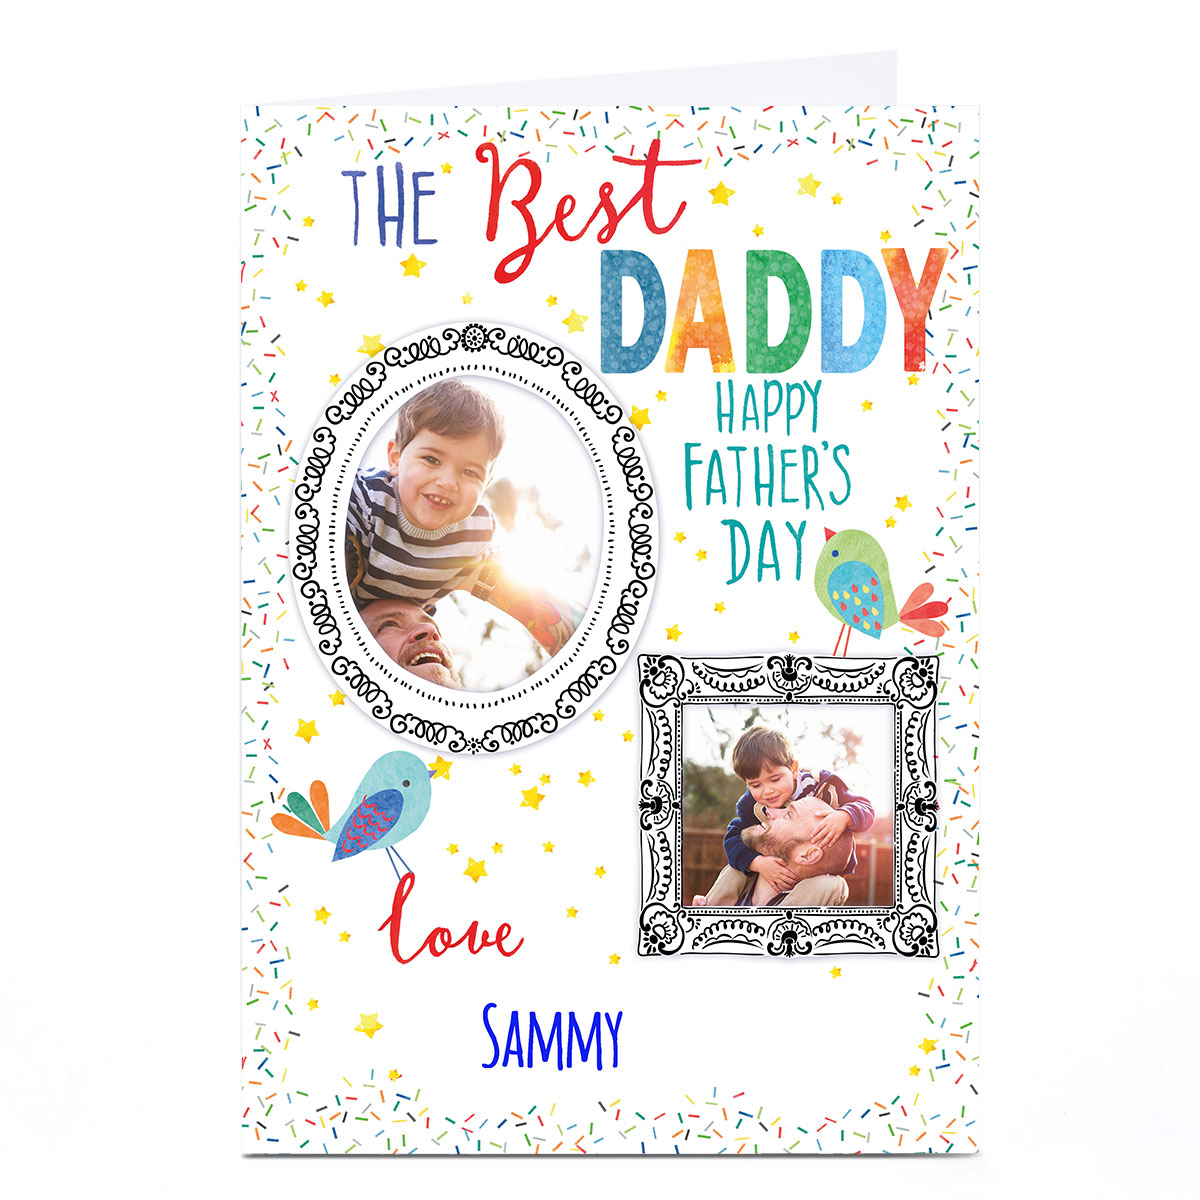 Personalised Nik Golesworthy Father's Day Card - Best Daddy